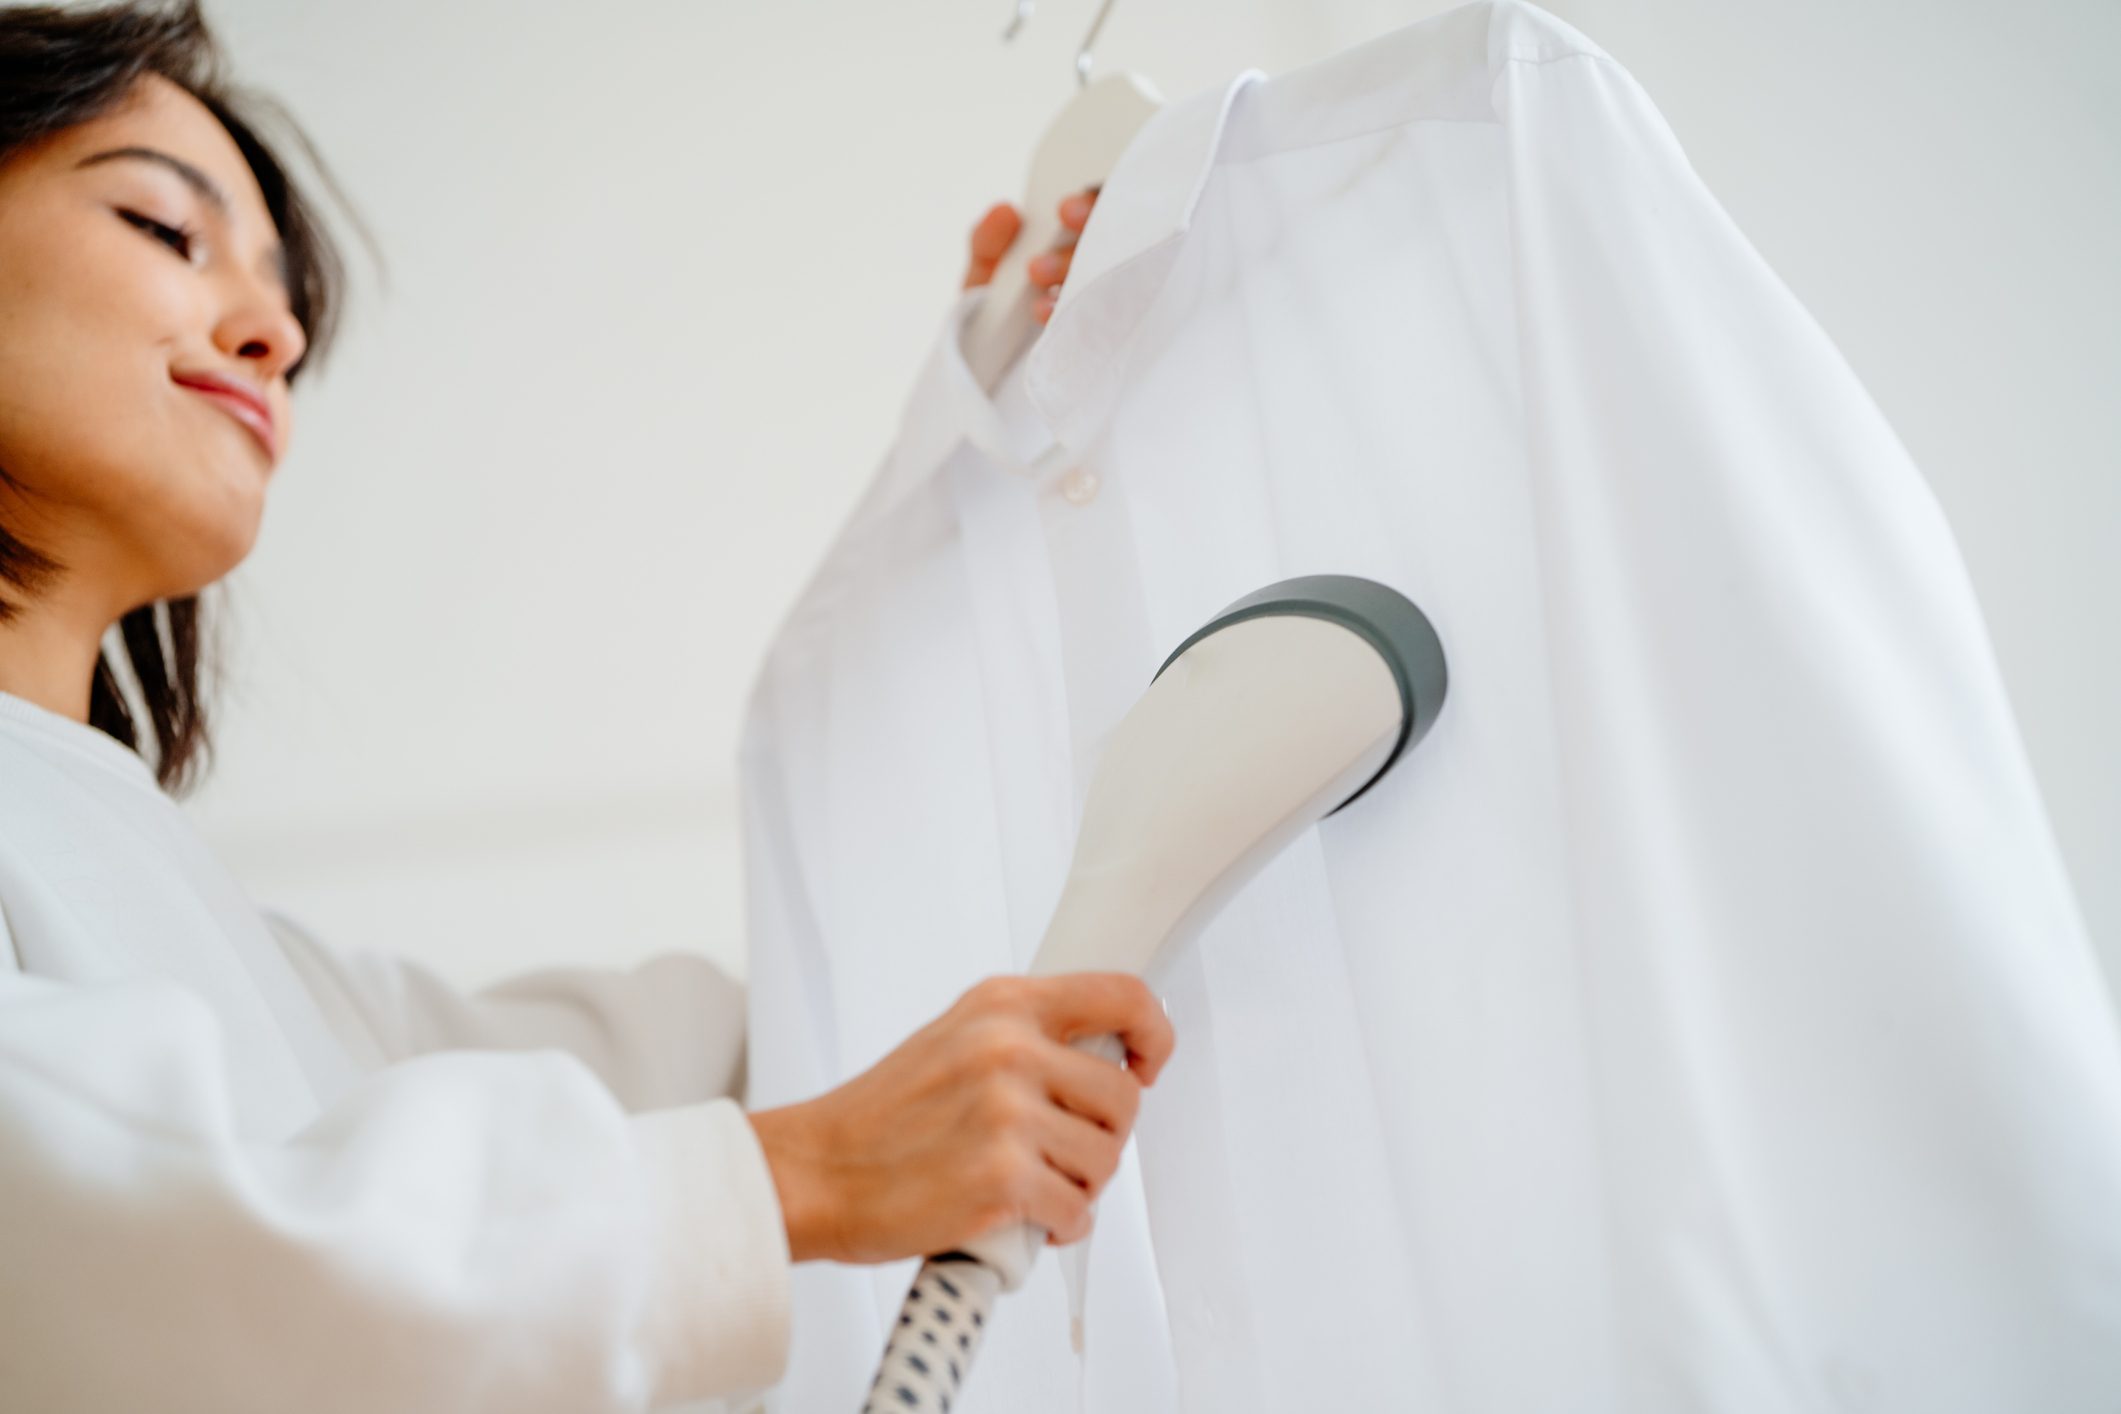 Woman using clothes steamer machine for removing wrinkles and folds from a white shirt